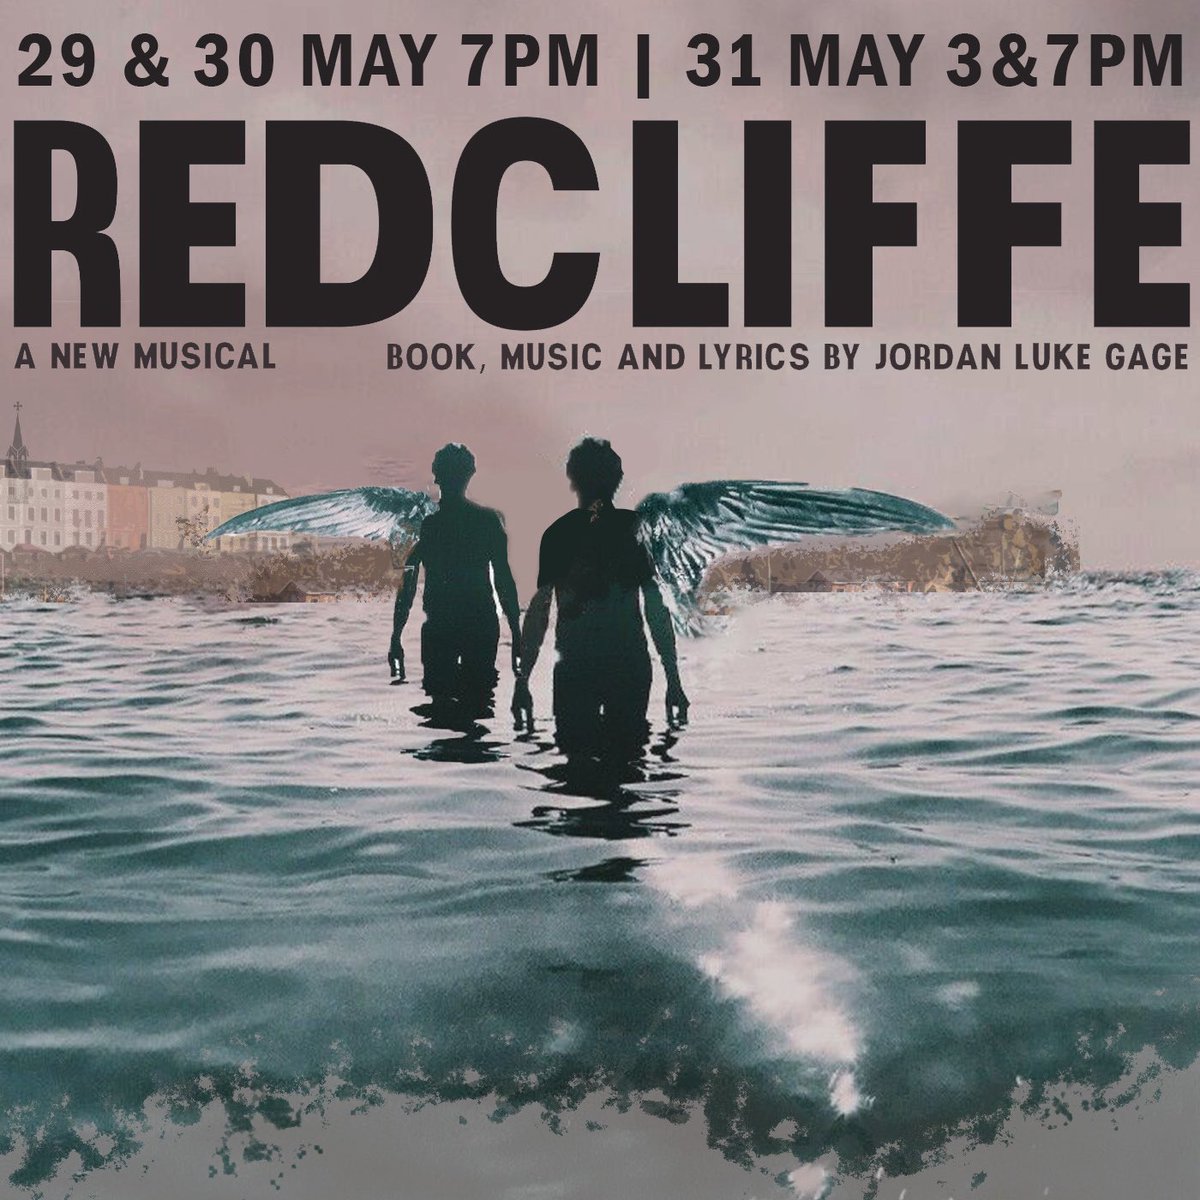 .@JordanLukeGage’s Redcliffe returns with public workshop performances at @TheOtherPalace from 29-31st May. Jordan will star as William alongside @LiamTamne as Richard. theotherpalace.co.uk/redcliffe-2/